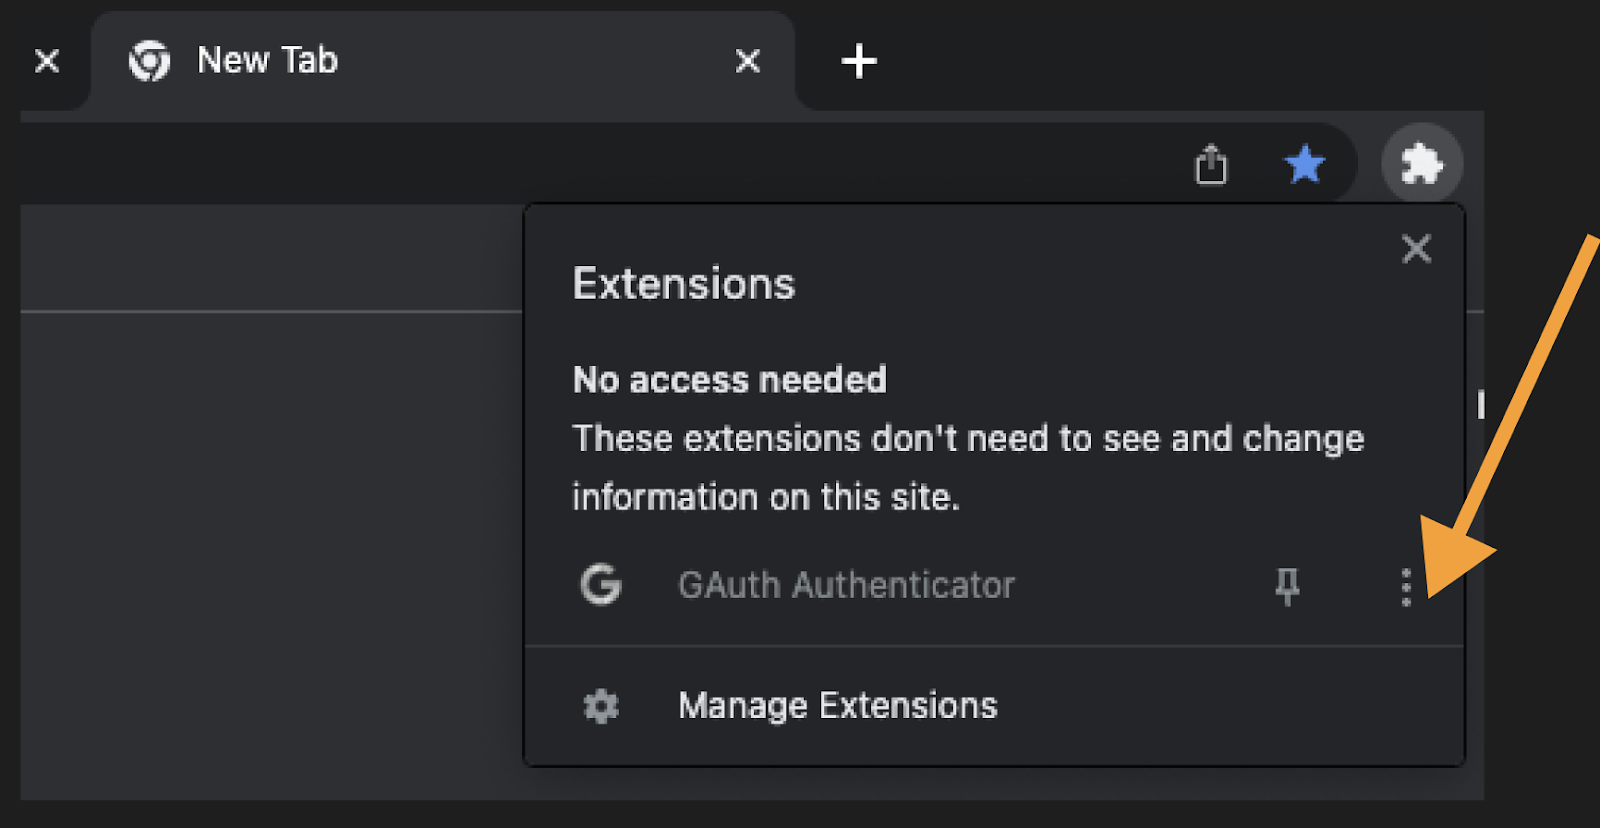 Chrome's "Manage Extension" popup lists GAuth Authenticator extension